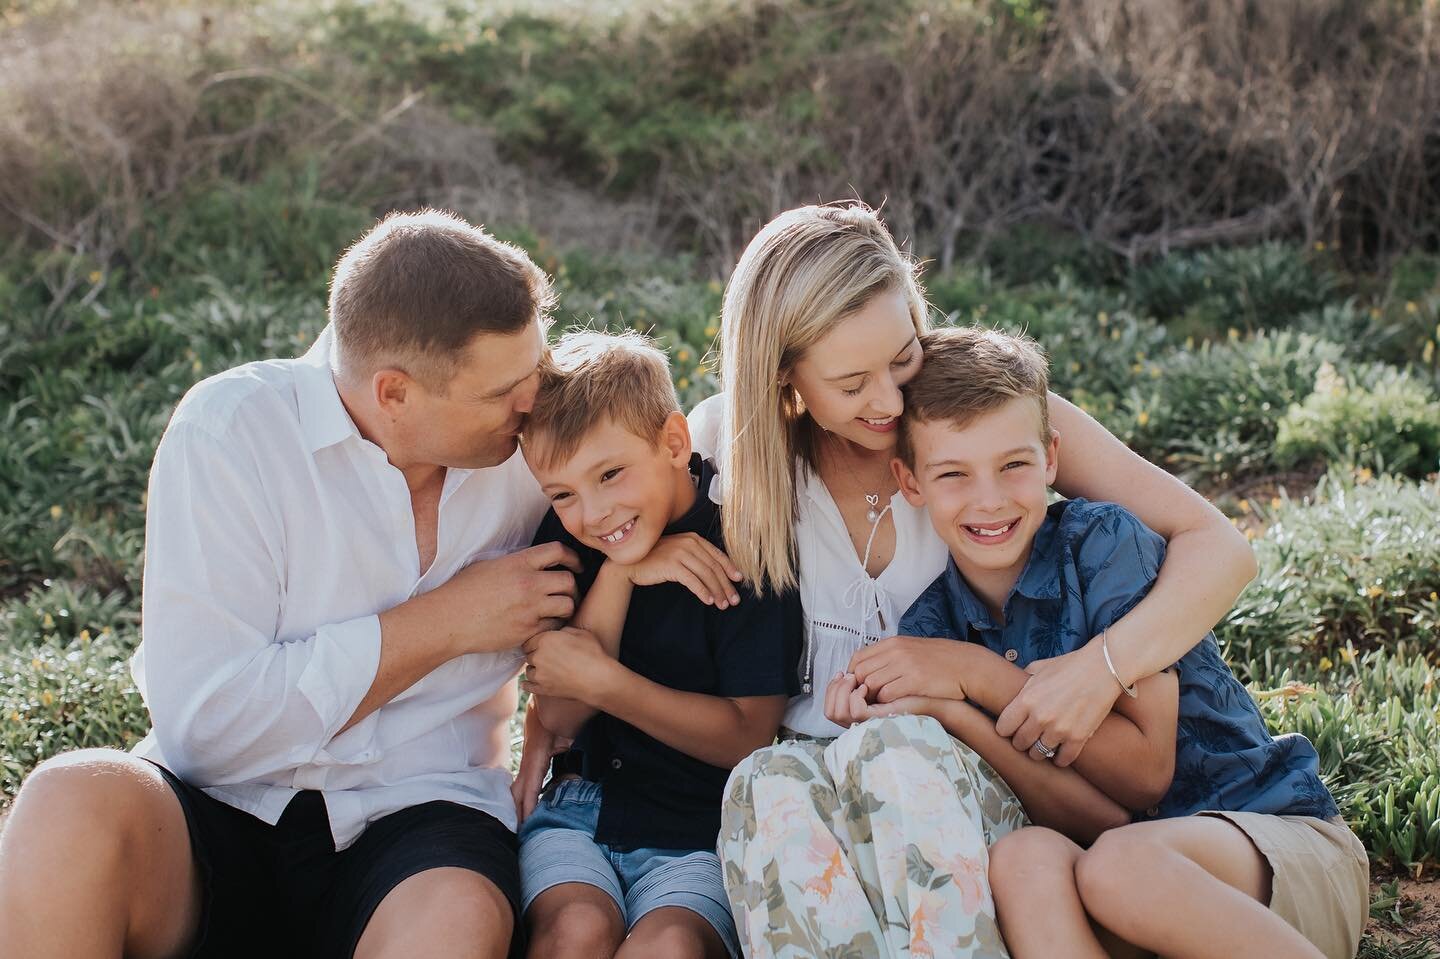 Loved seeing this family again 💫🧡 @anna_bowen #courtneykingphotography #familyphotography #captureyourmemories